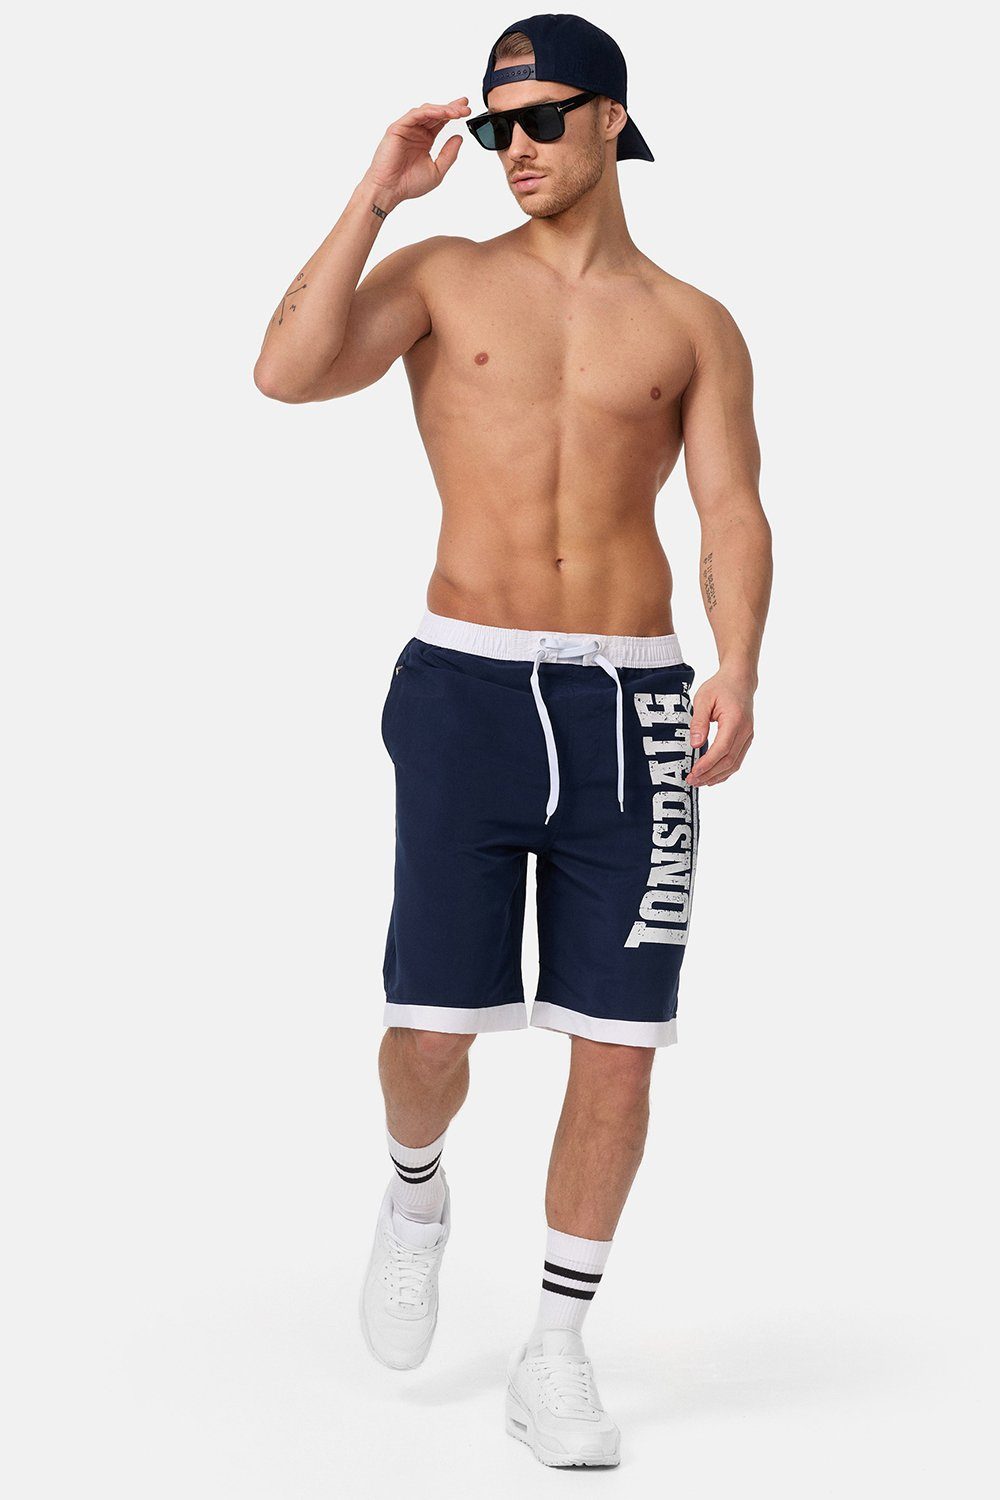 CLENNELL Lonsdale Navy/White Badehose